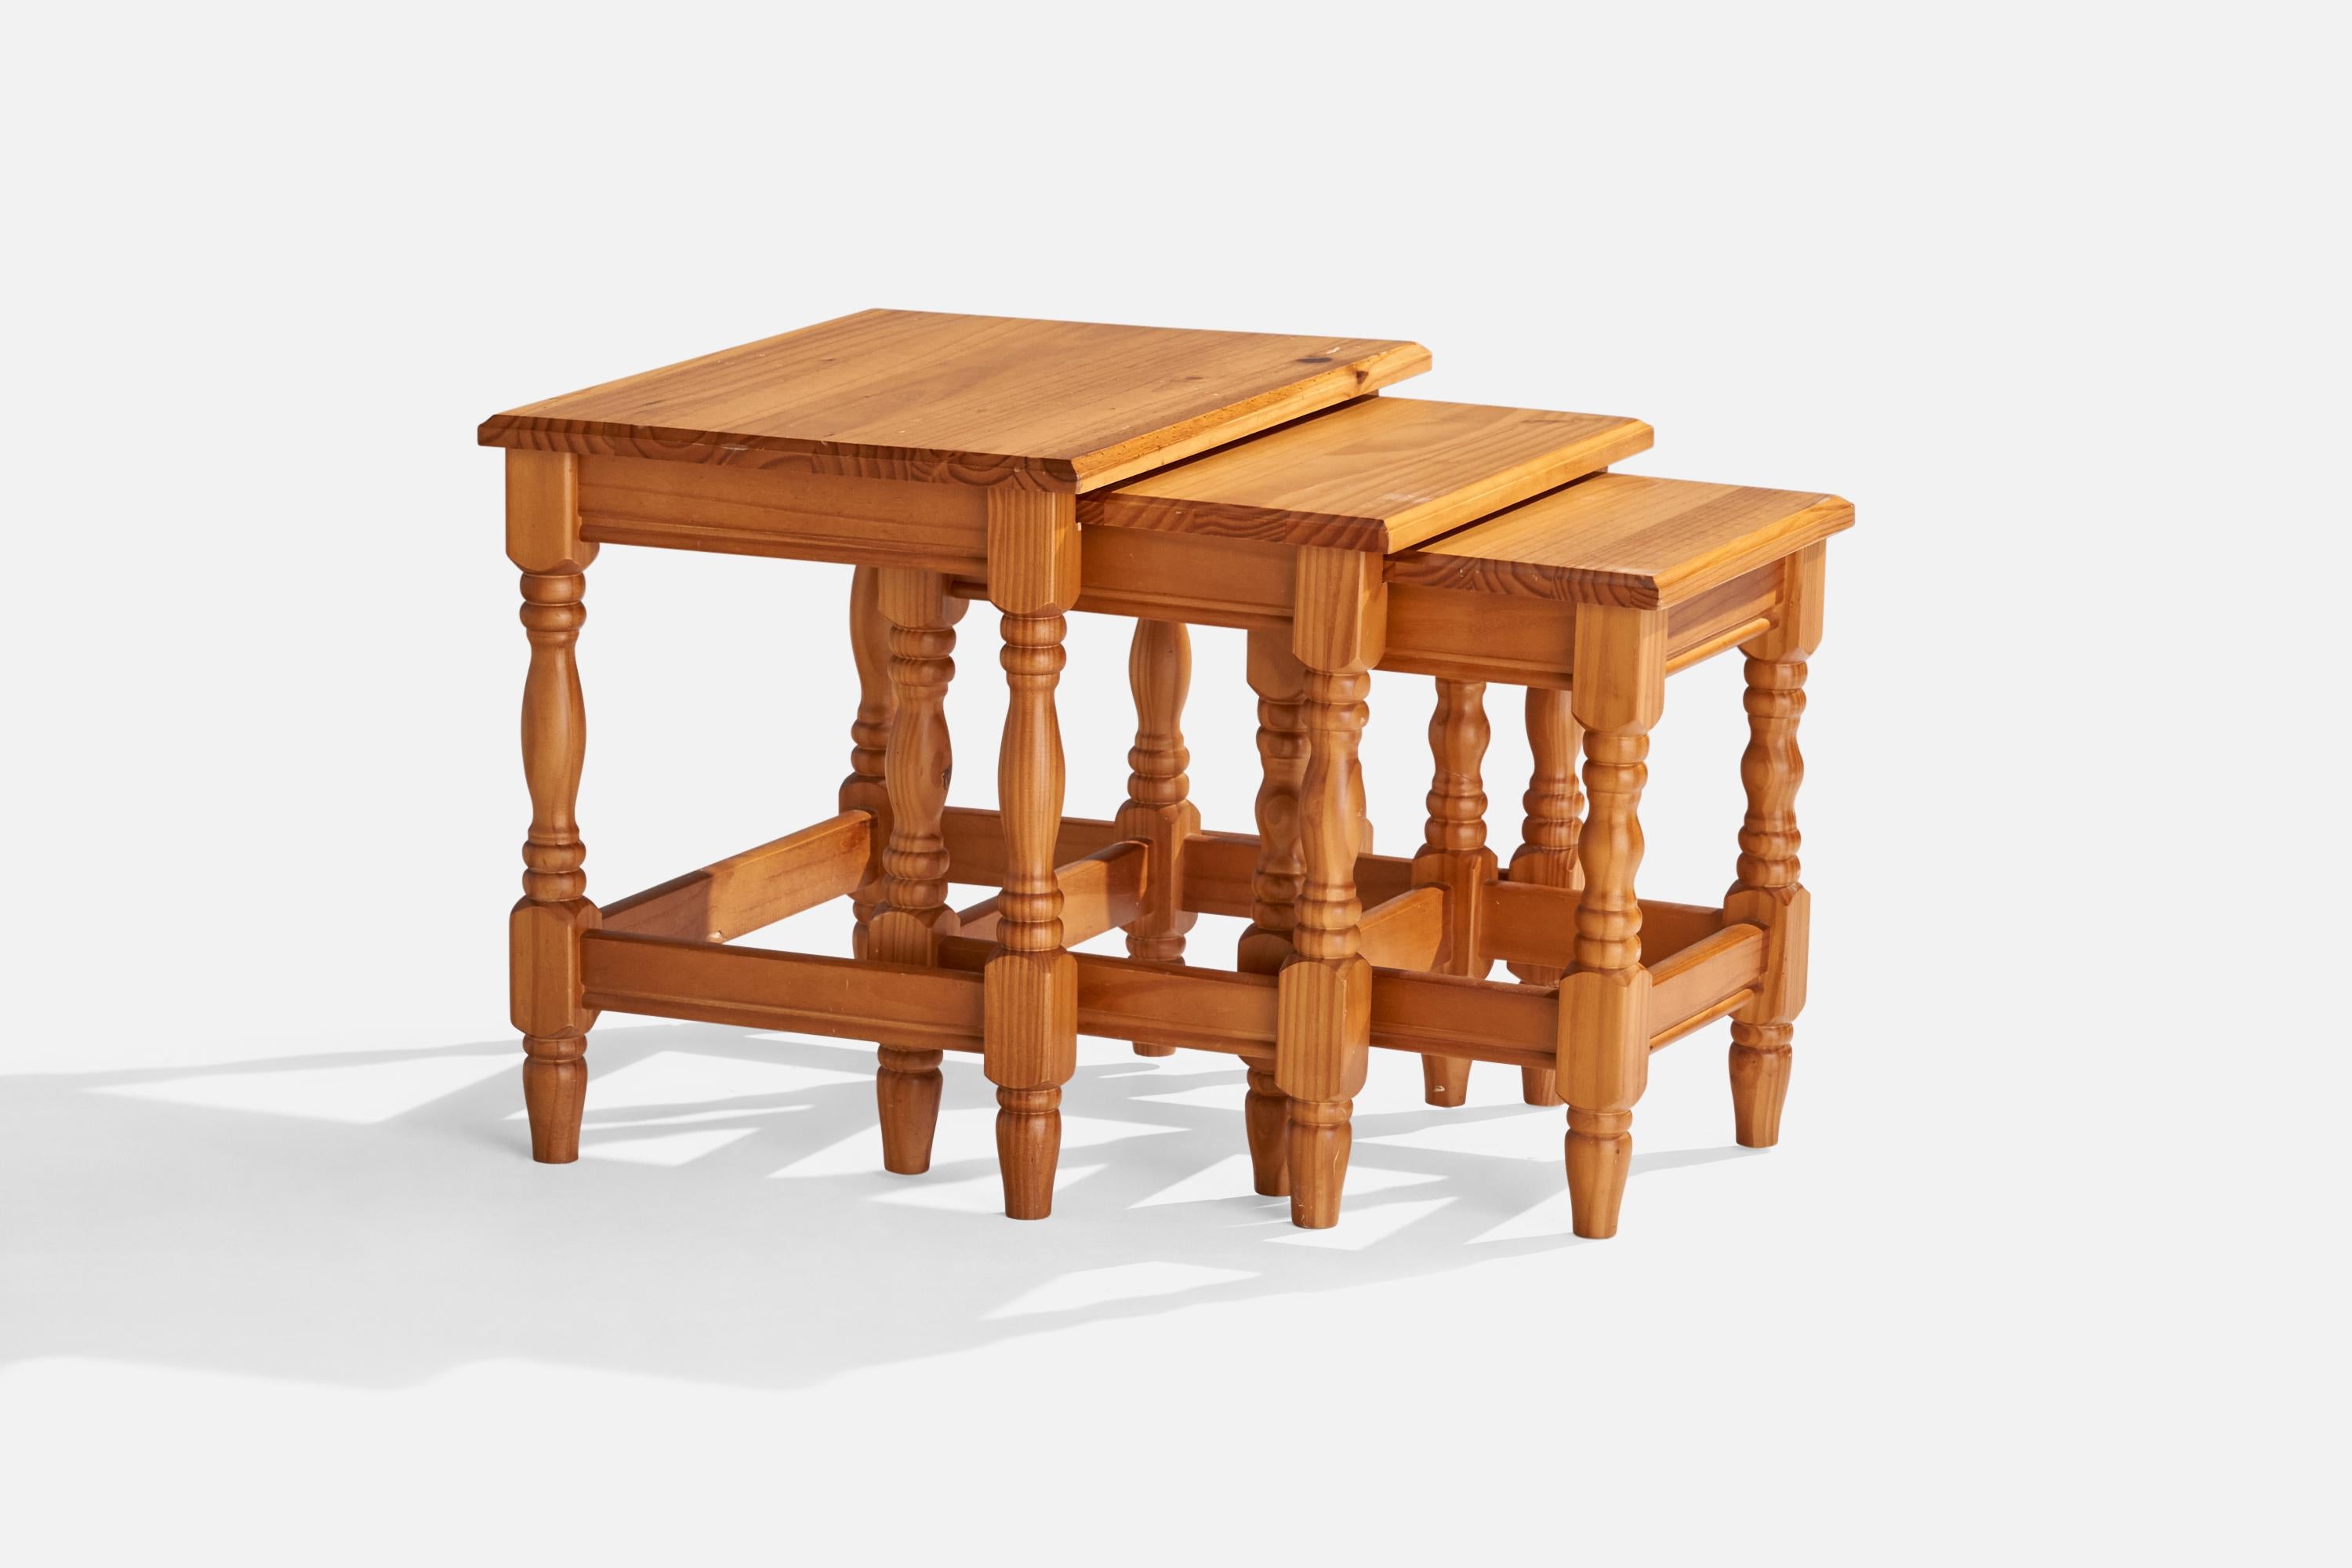 A set of three pine nesting tables designed and produced in Sweden, c. 1970s.

Size on medium table: 17.75”H x 17.625”W x 14.25”D
Size on smallest table: 16.5”H x 13.5”W x 11.5”D